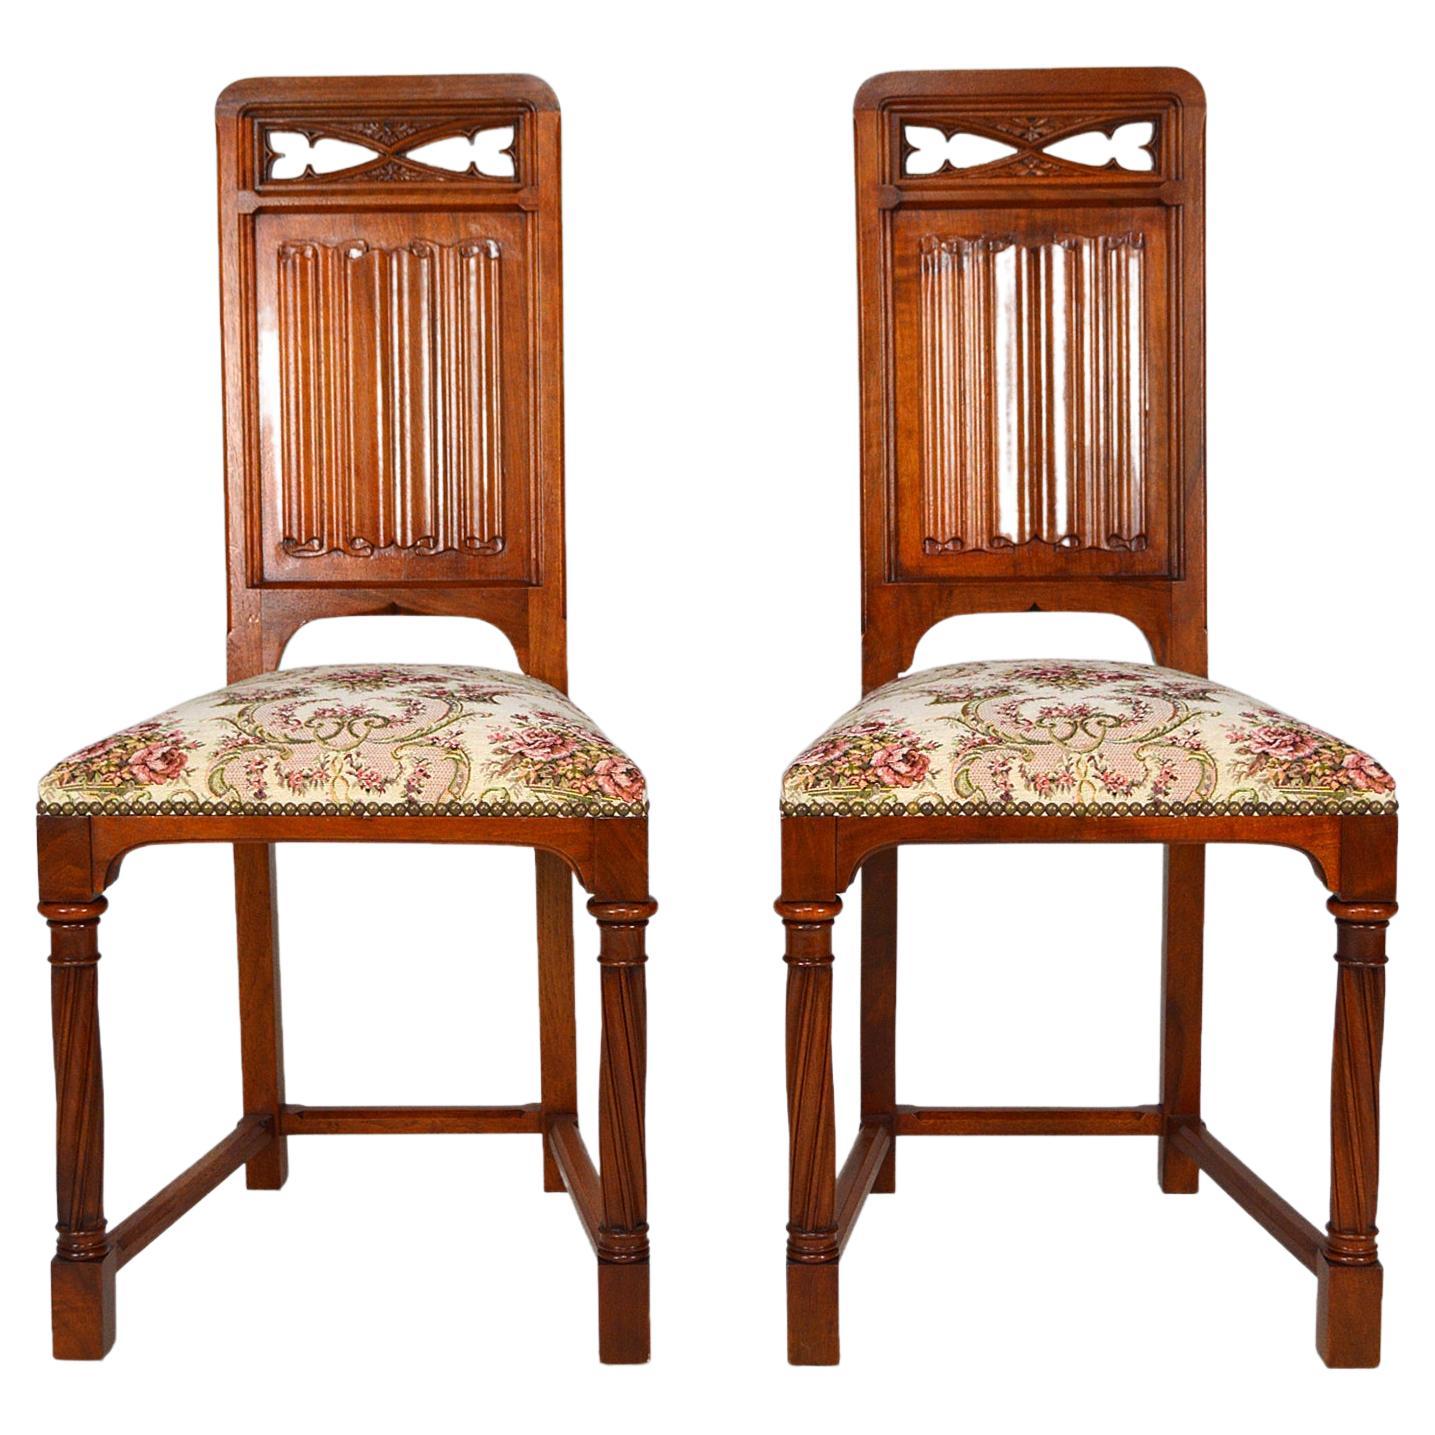 Pair of Gothic Revival Chairs in Carved Walnut, France, circa 1890